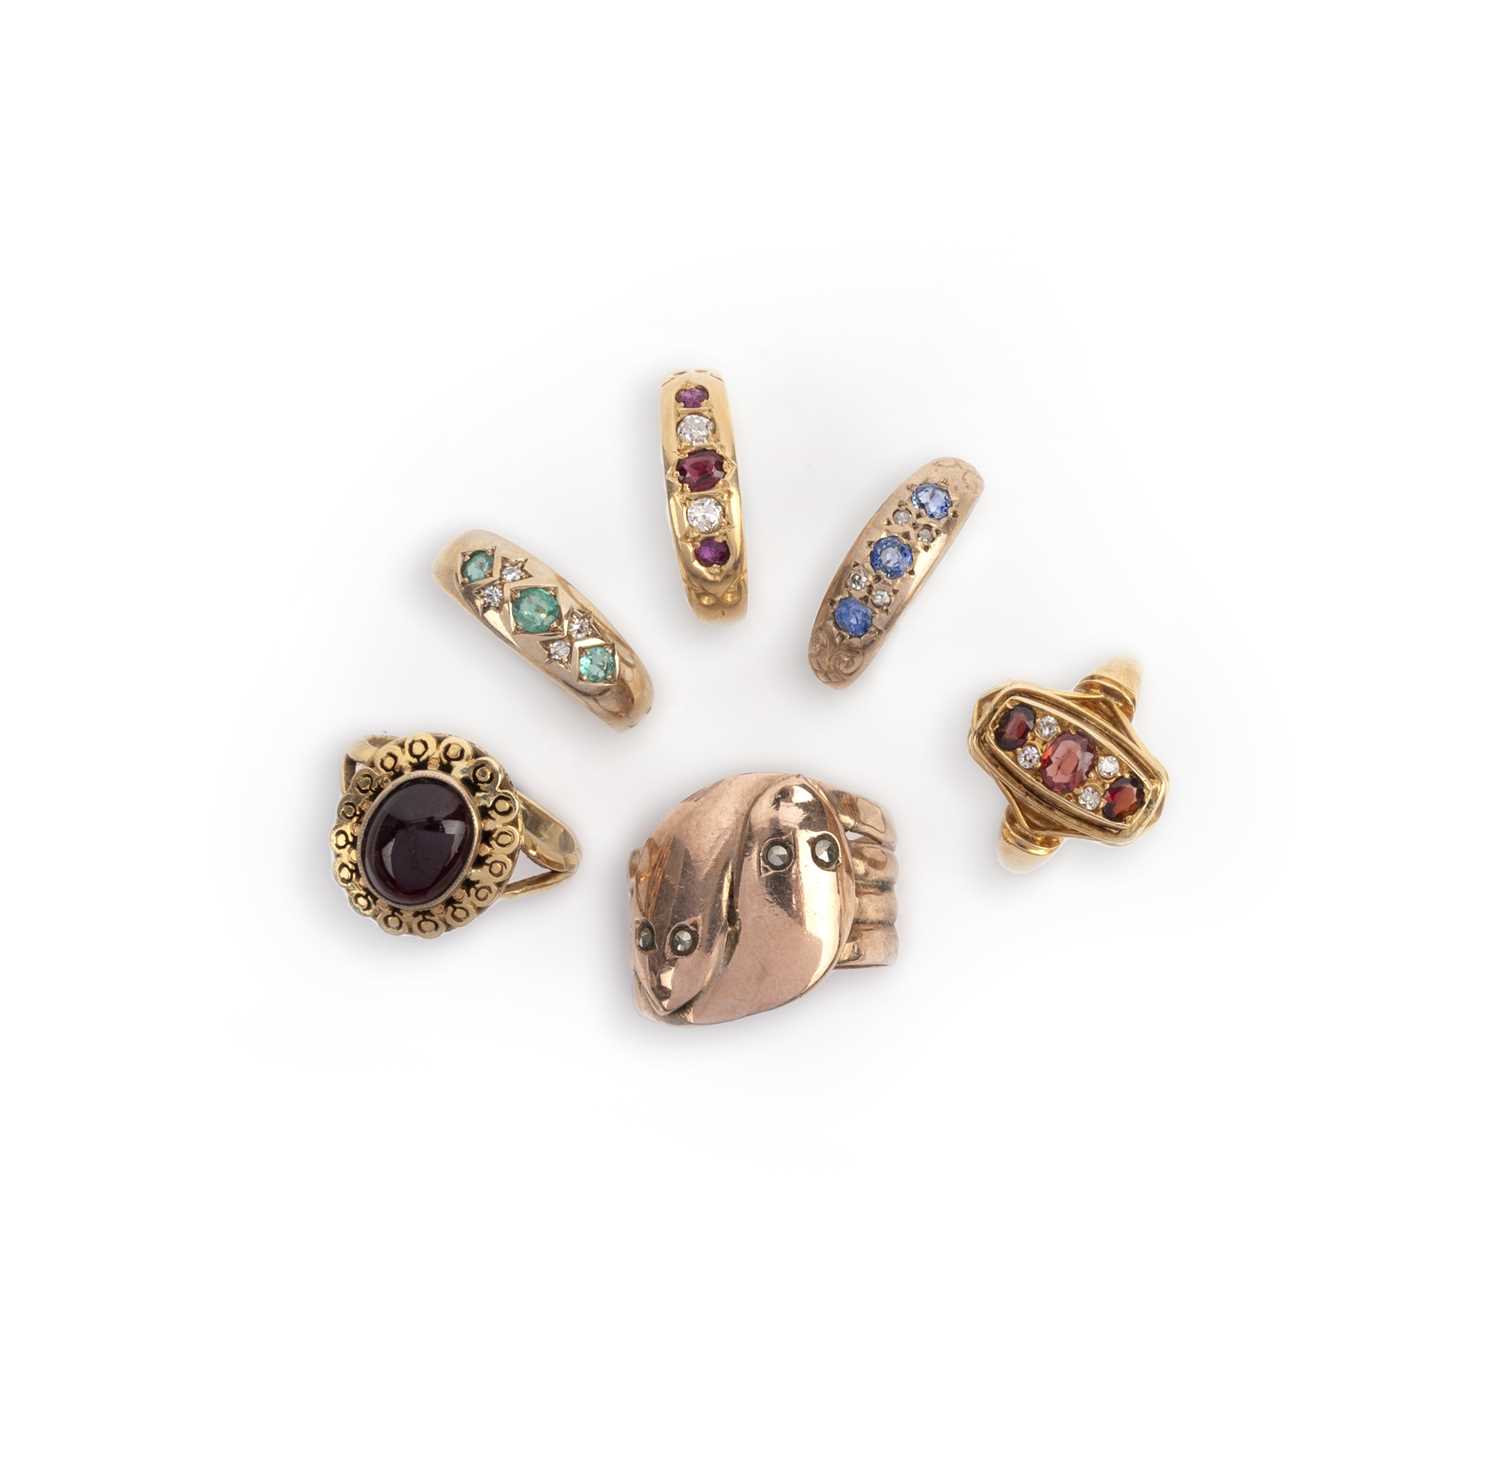 Six gem-set rings, comprising: a 9ct wide band designed as entwined snakes, set with rose-cut